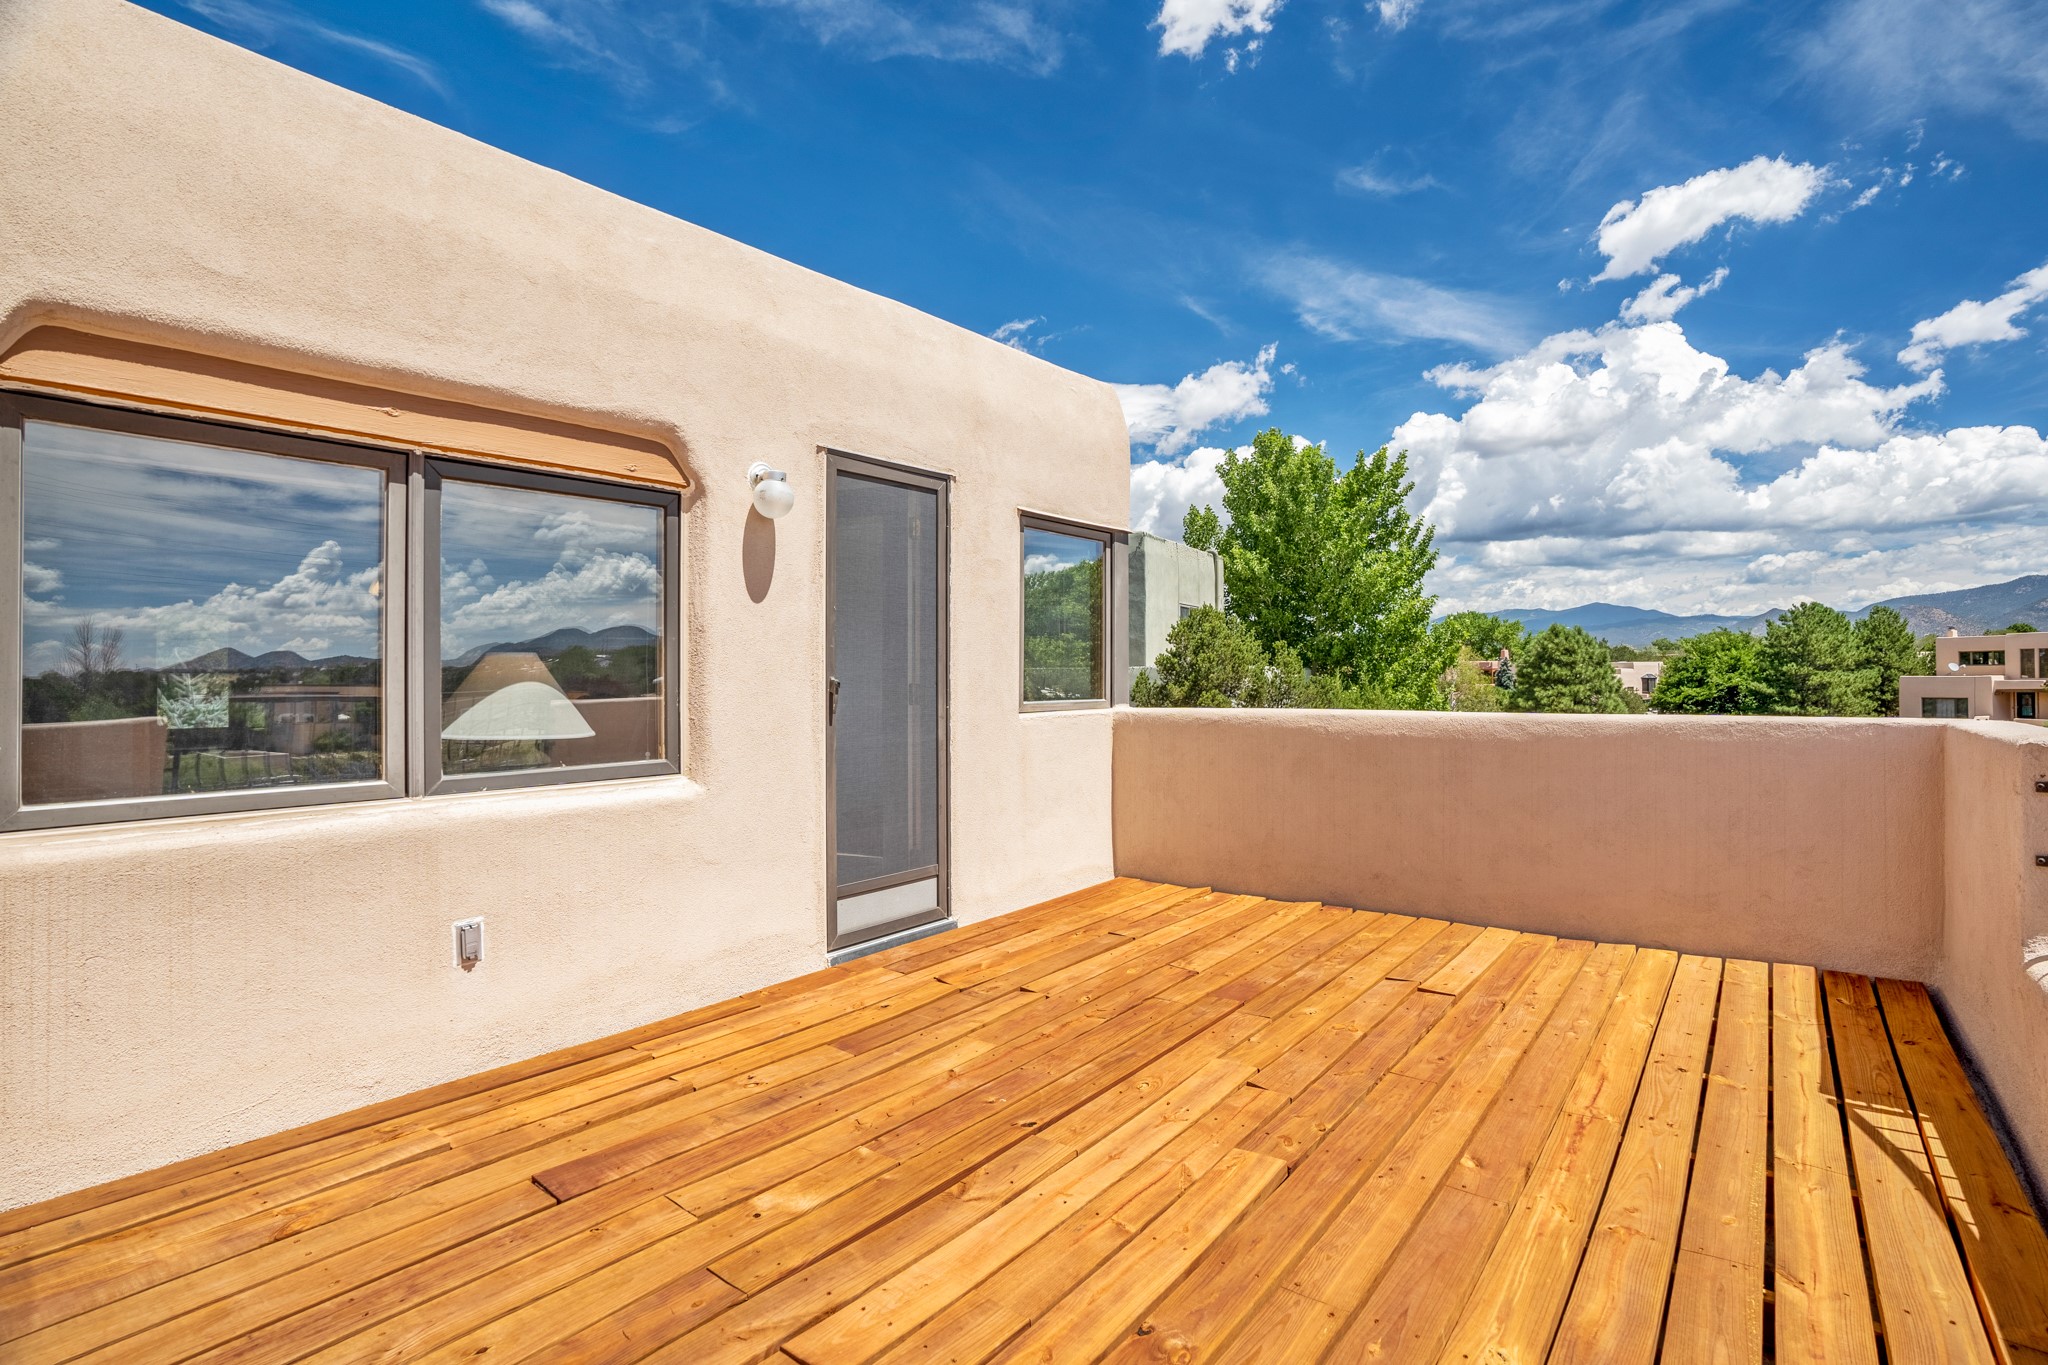 Deck off Primary bedroom with views forever